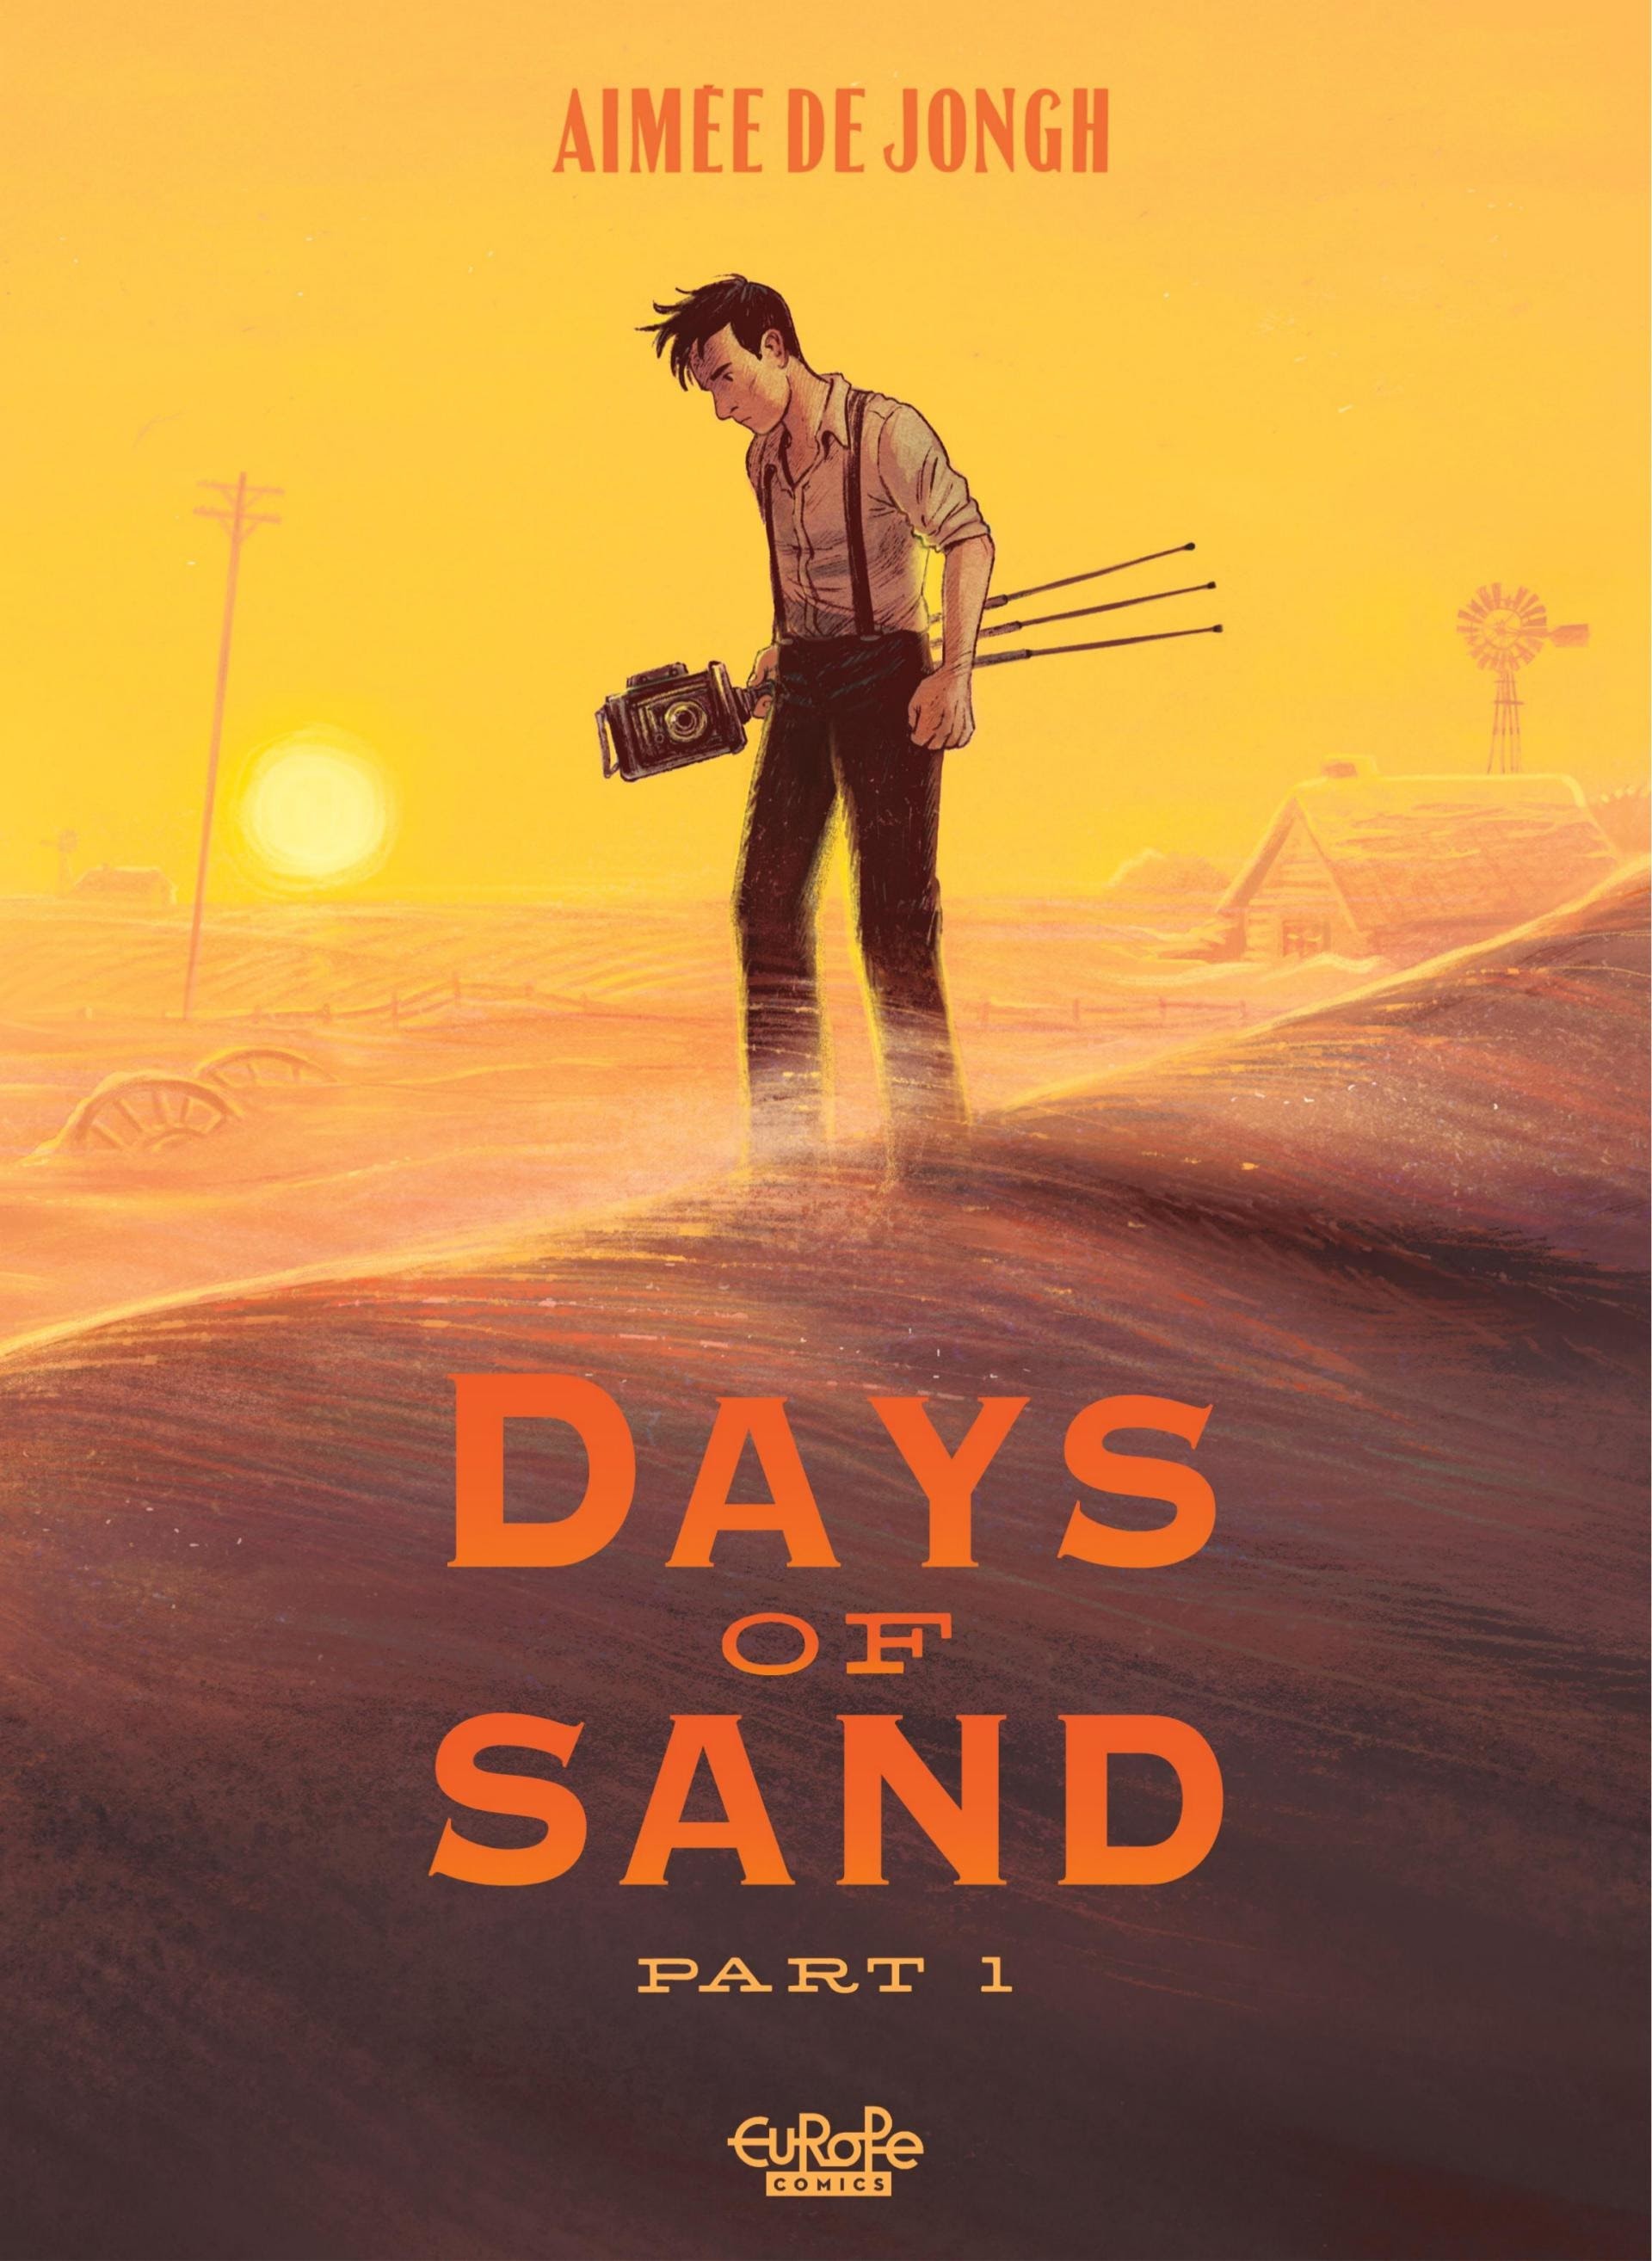 Read online Days of Sand comic -  Issue # TPB 1 - 1